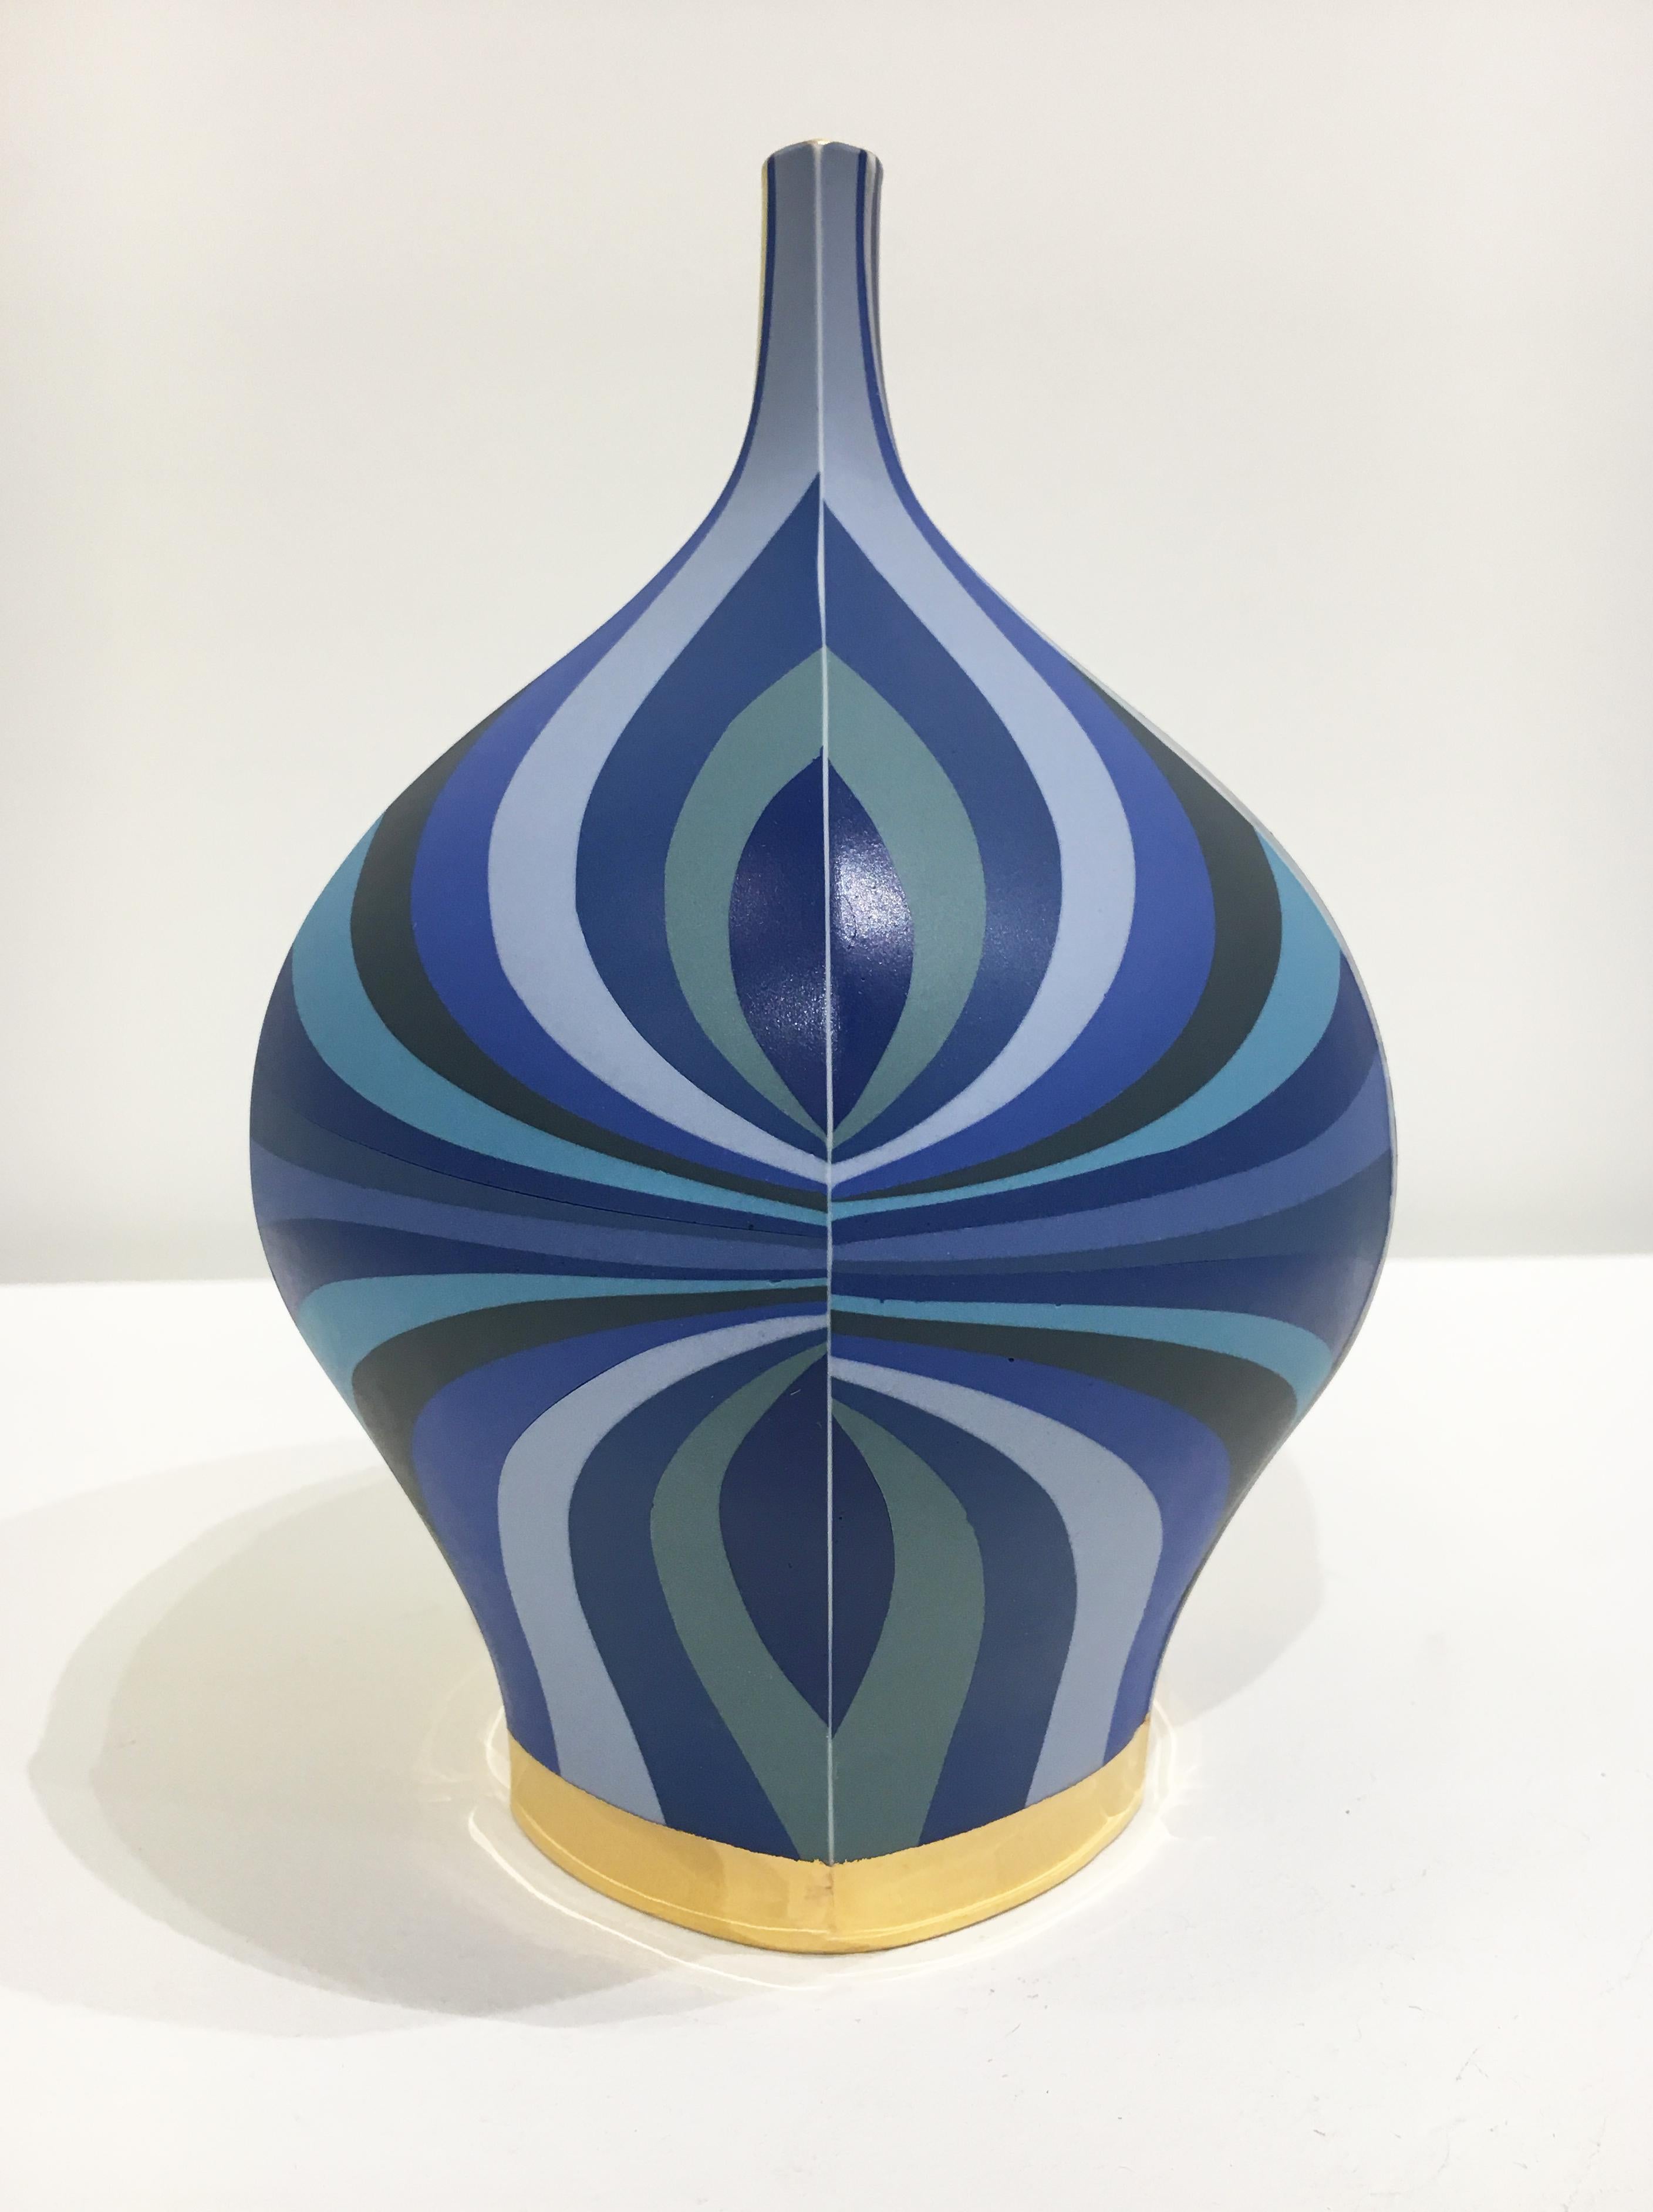 Born in Rochester, NY, Peter Pincus is a ceramic artist and instructor. Peter received his BFA (2005) and MFA (2011) in ceramics from Alfred University, and in between was a resident artist at the Mendocino Art Center in Mendocino, California. Since